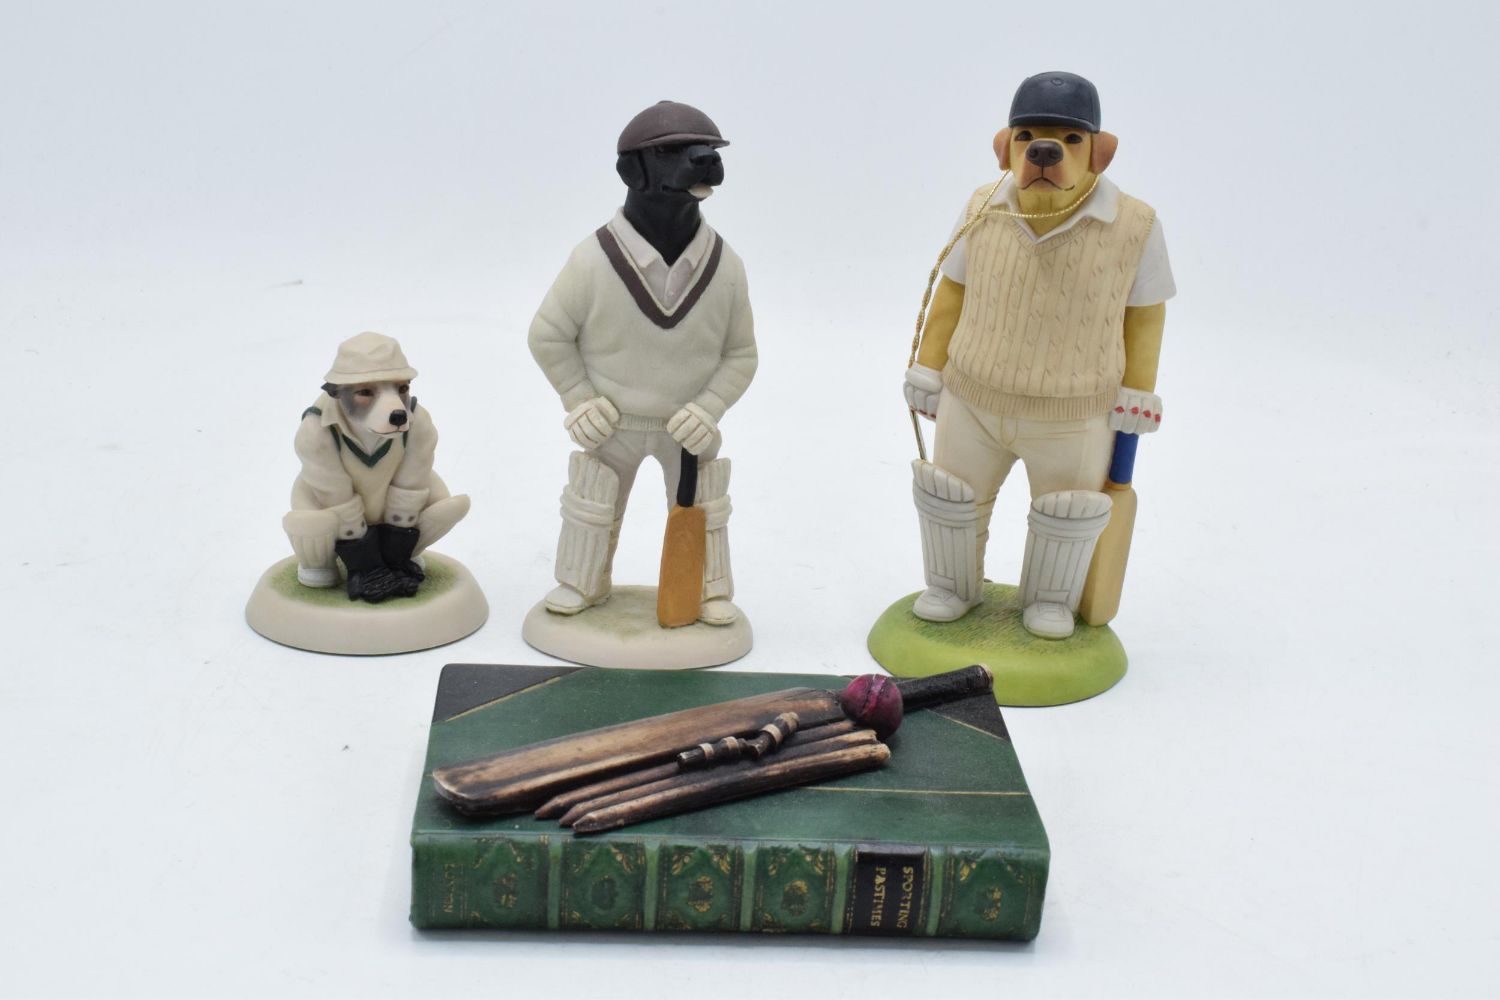 Monthly Auction of Antiques and Collectables (Online-Only)